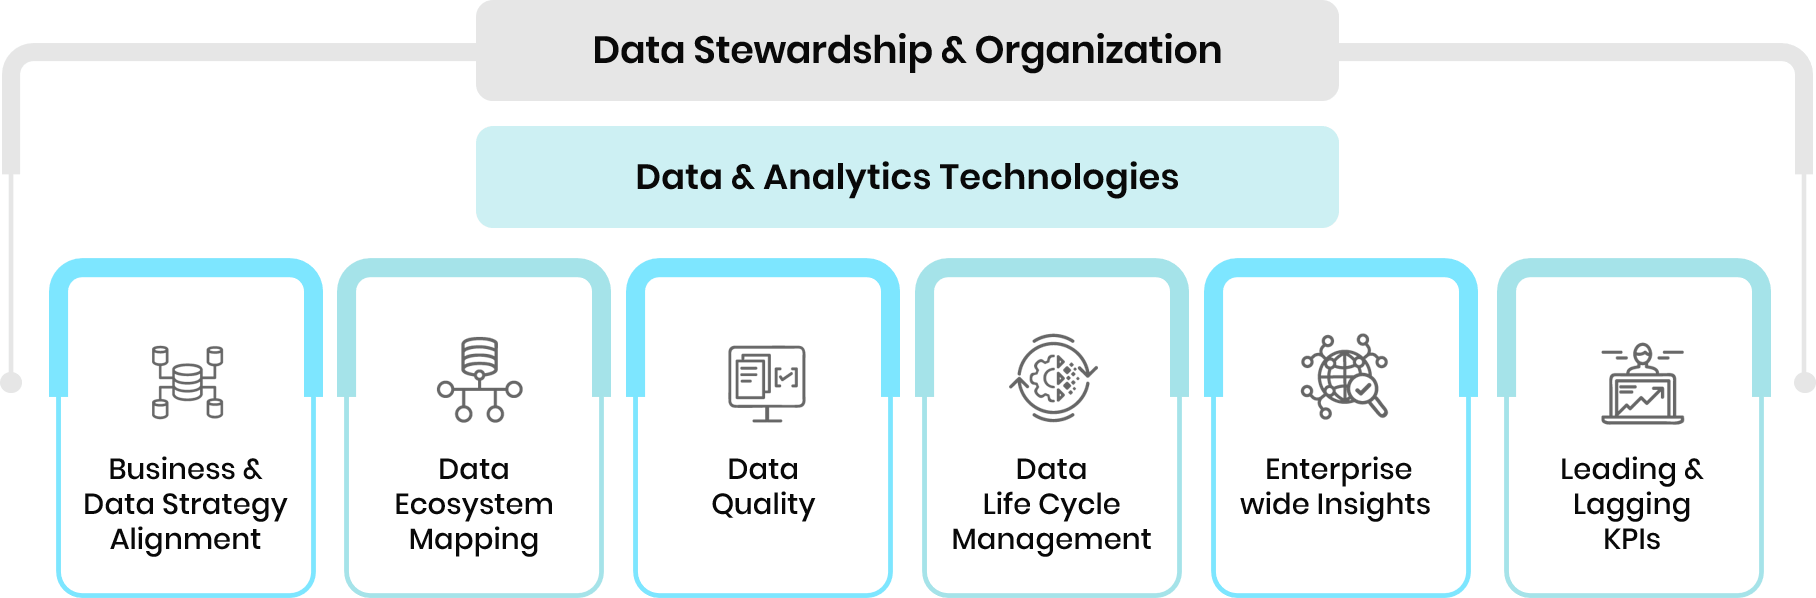 Graphic depicting Trianz data stewardship and organization model as part of enterprise data strategy